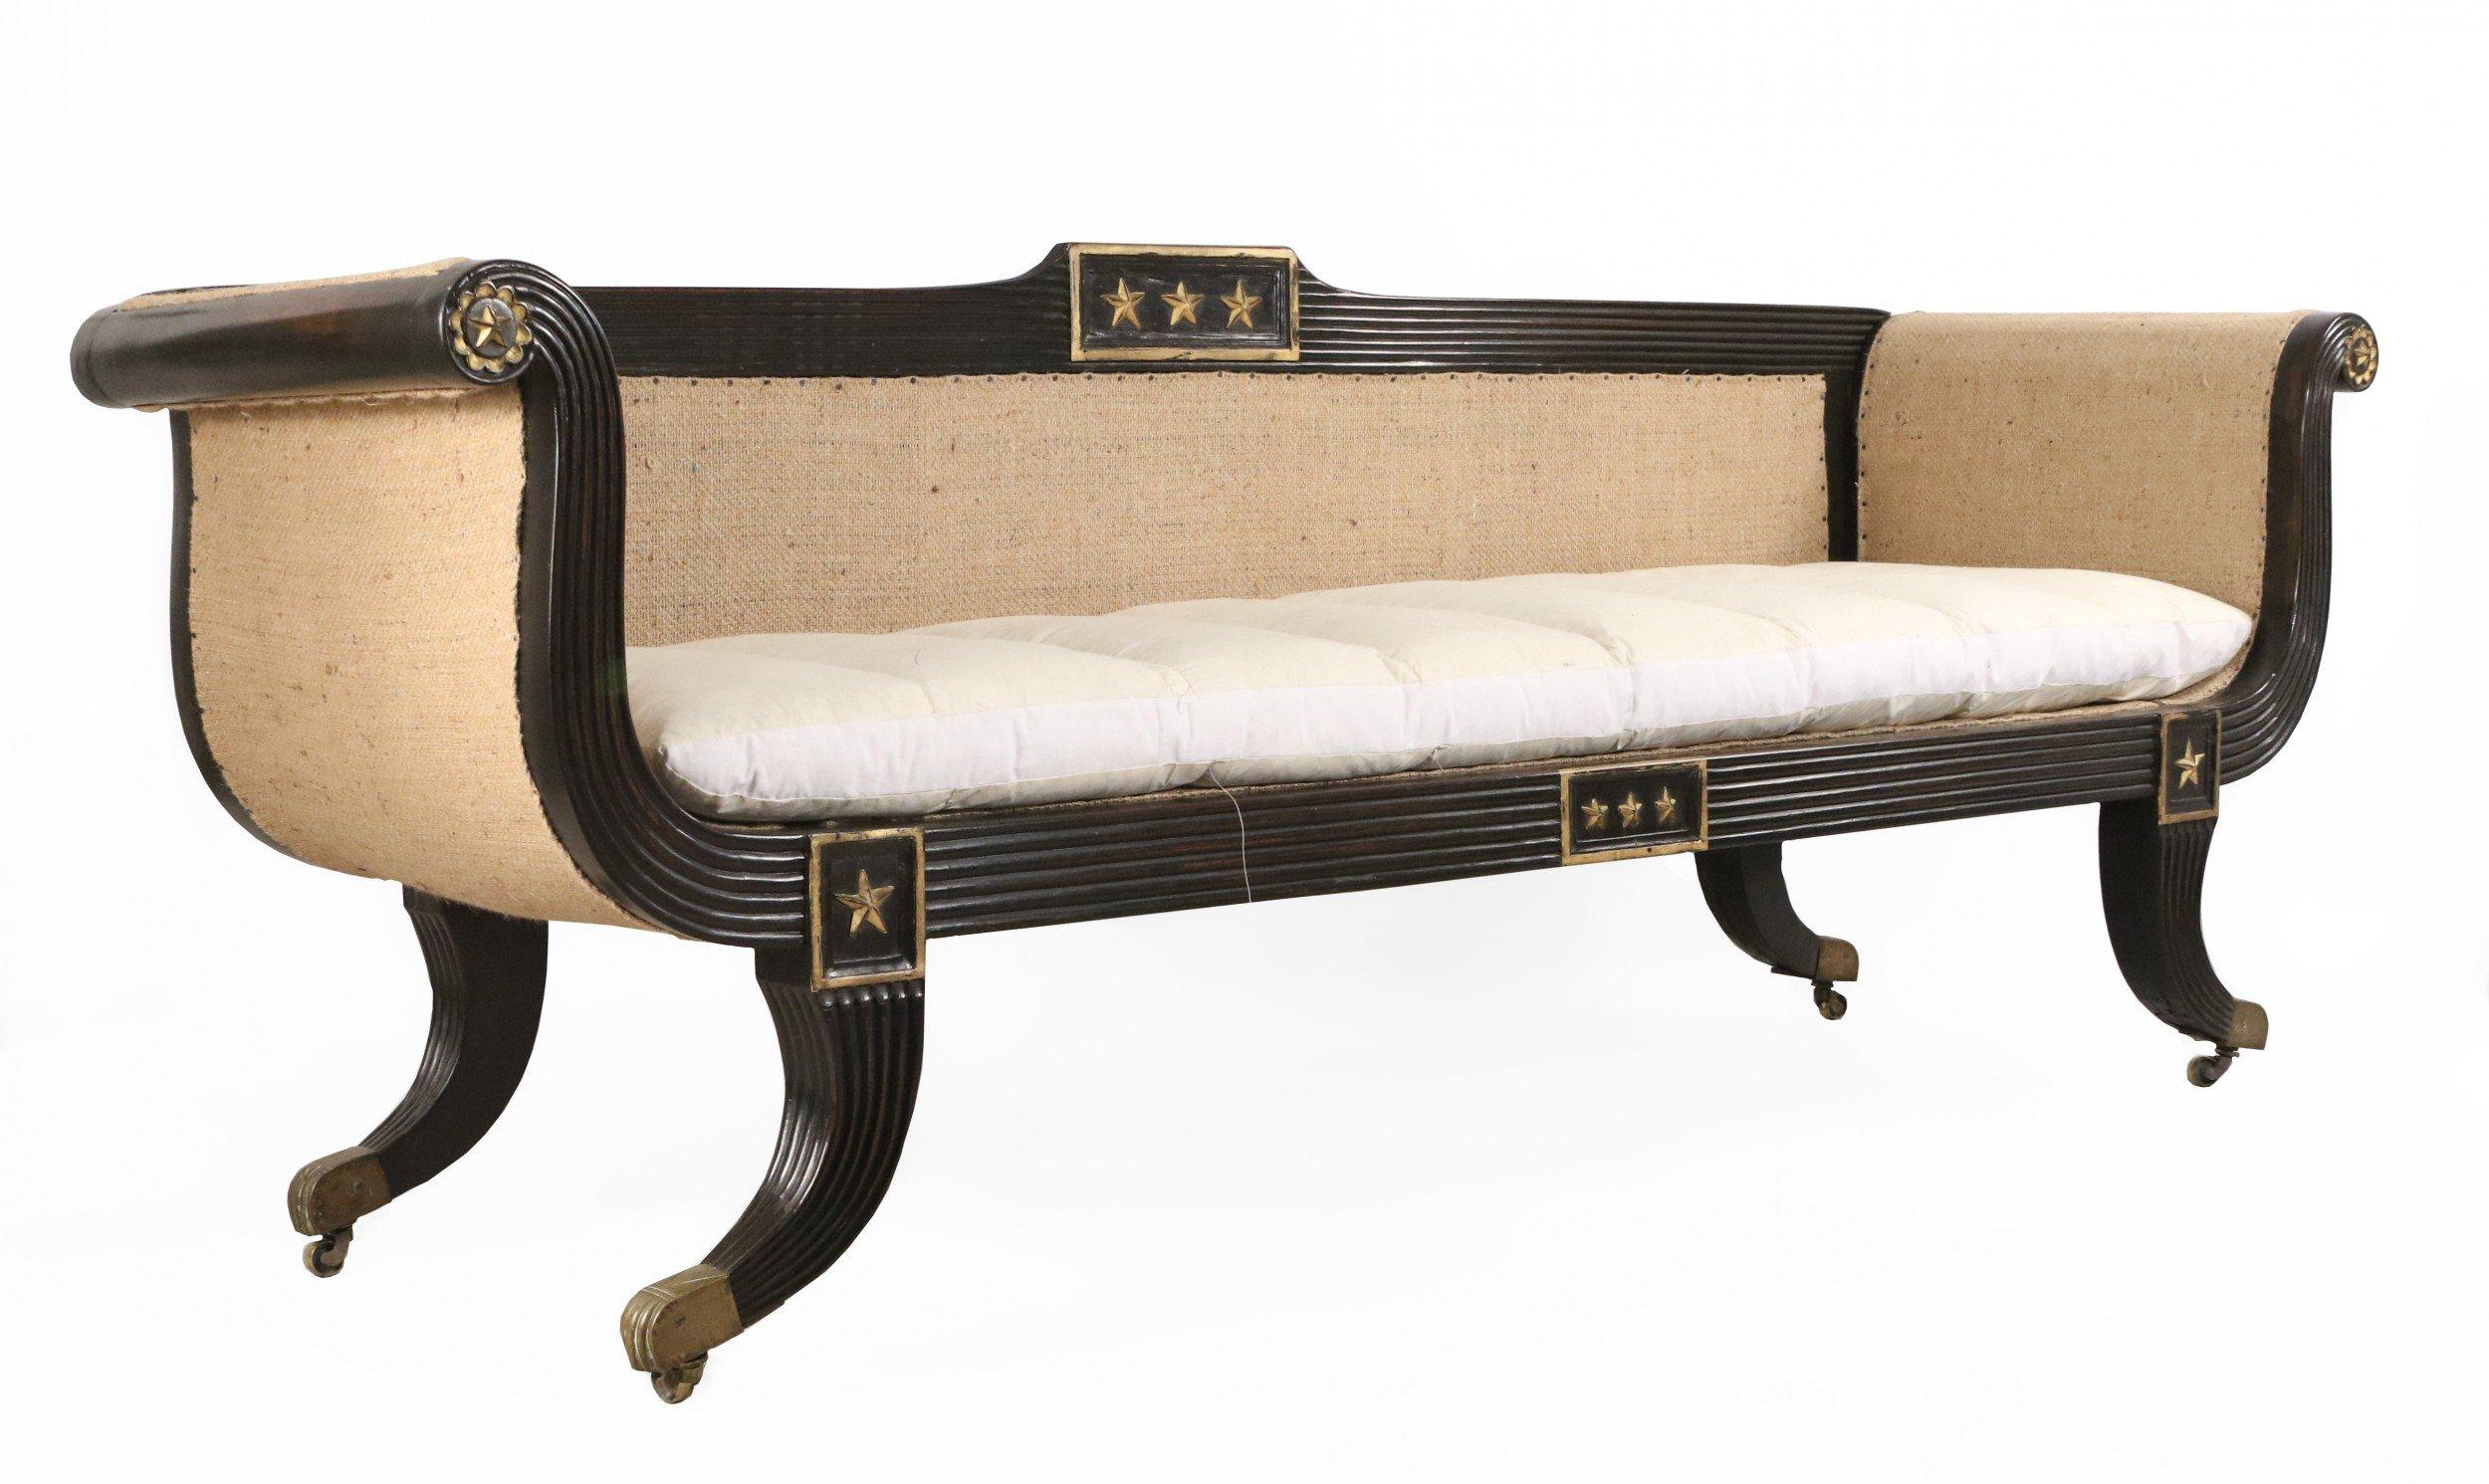 English Regency ebonized and fluted frame 3-seat settee with gilt trim and unfinished upholstered sides and back with a loose cotton-covered cushion, resting on brass casters.
 